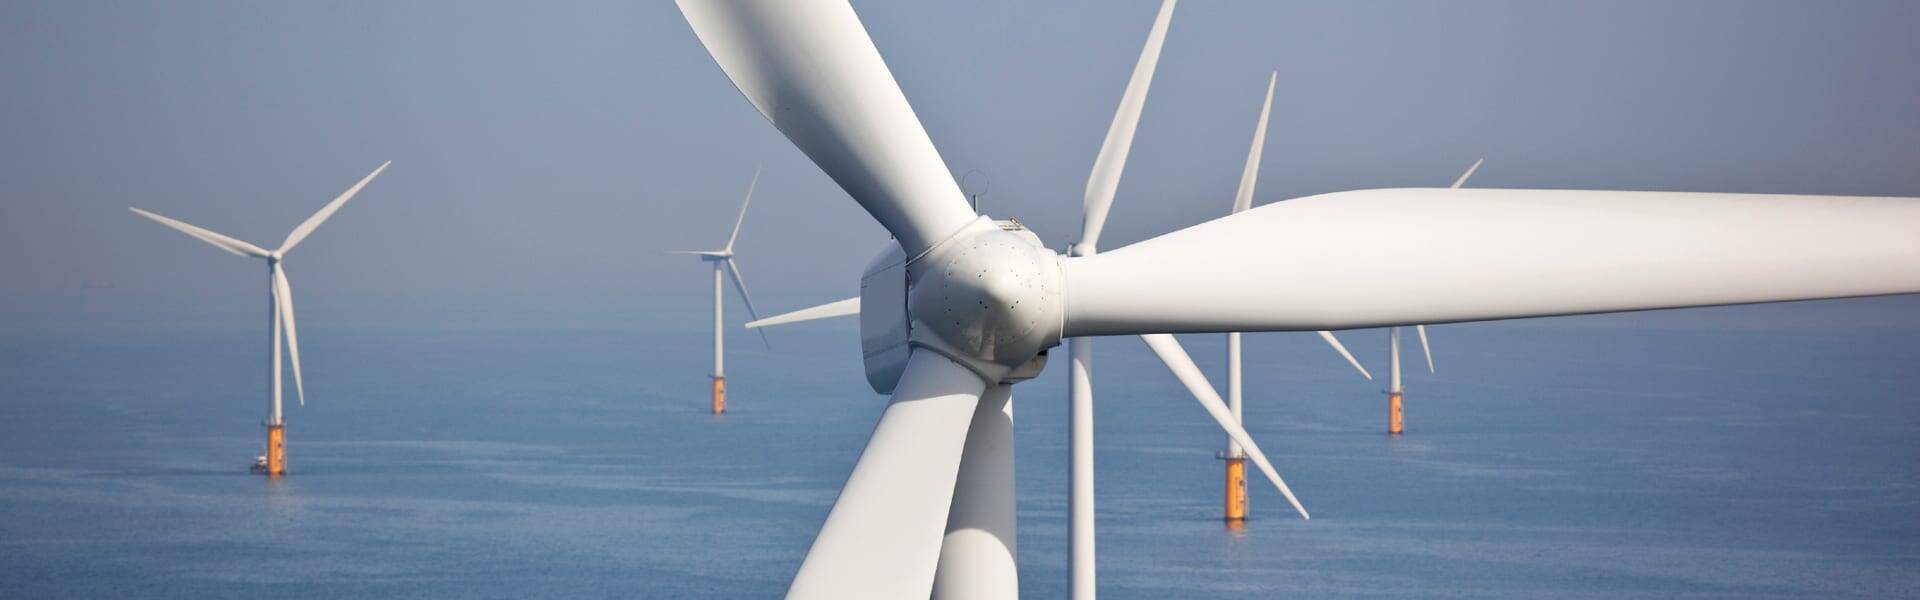 GIB offshore wind fund reaches £818m at second close